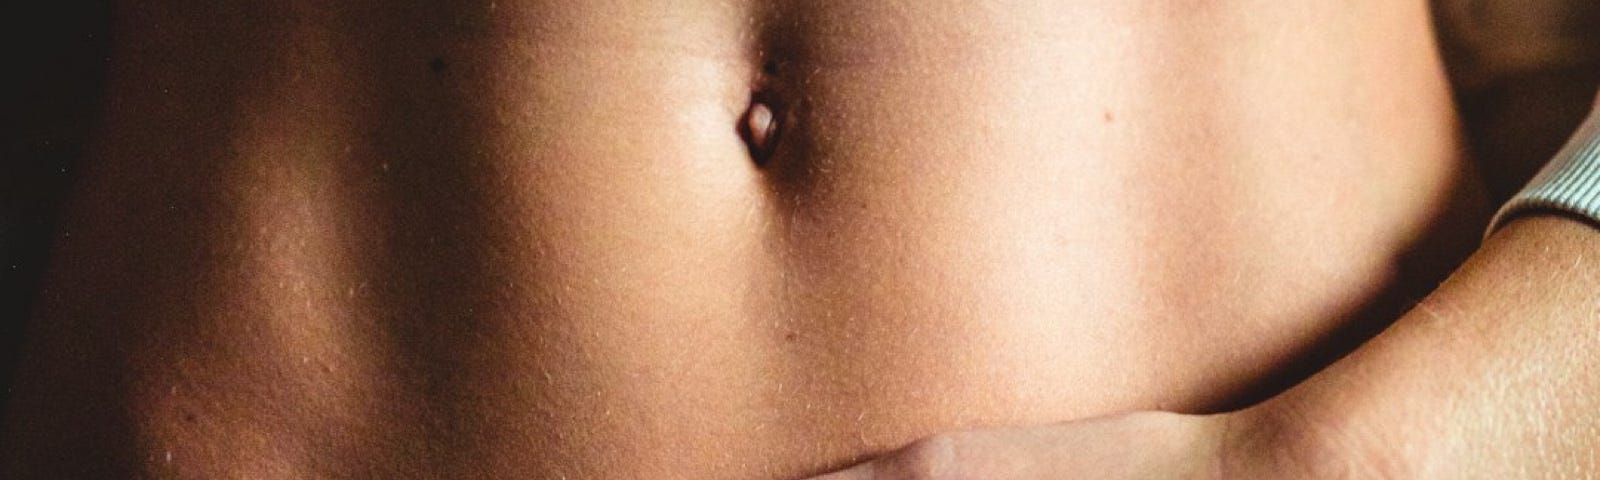 Close-up of a woman’s uncovered abdomen, with one hand over the breast area and one hand placed on the lower abdomen.